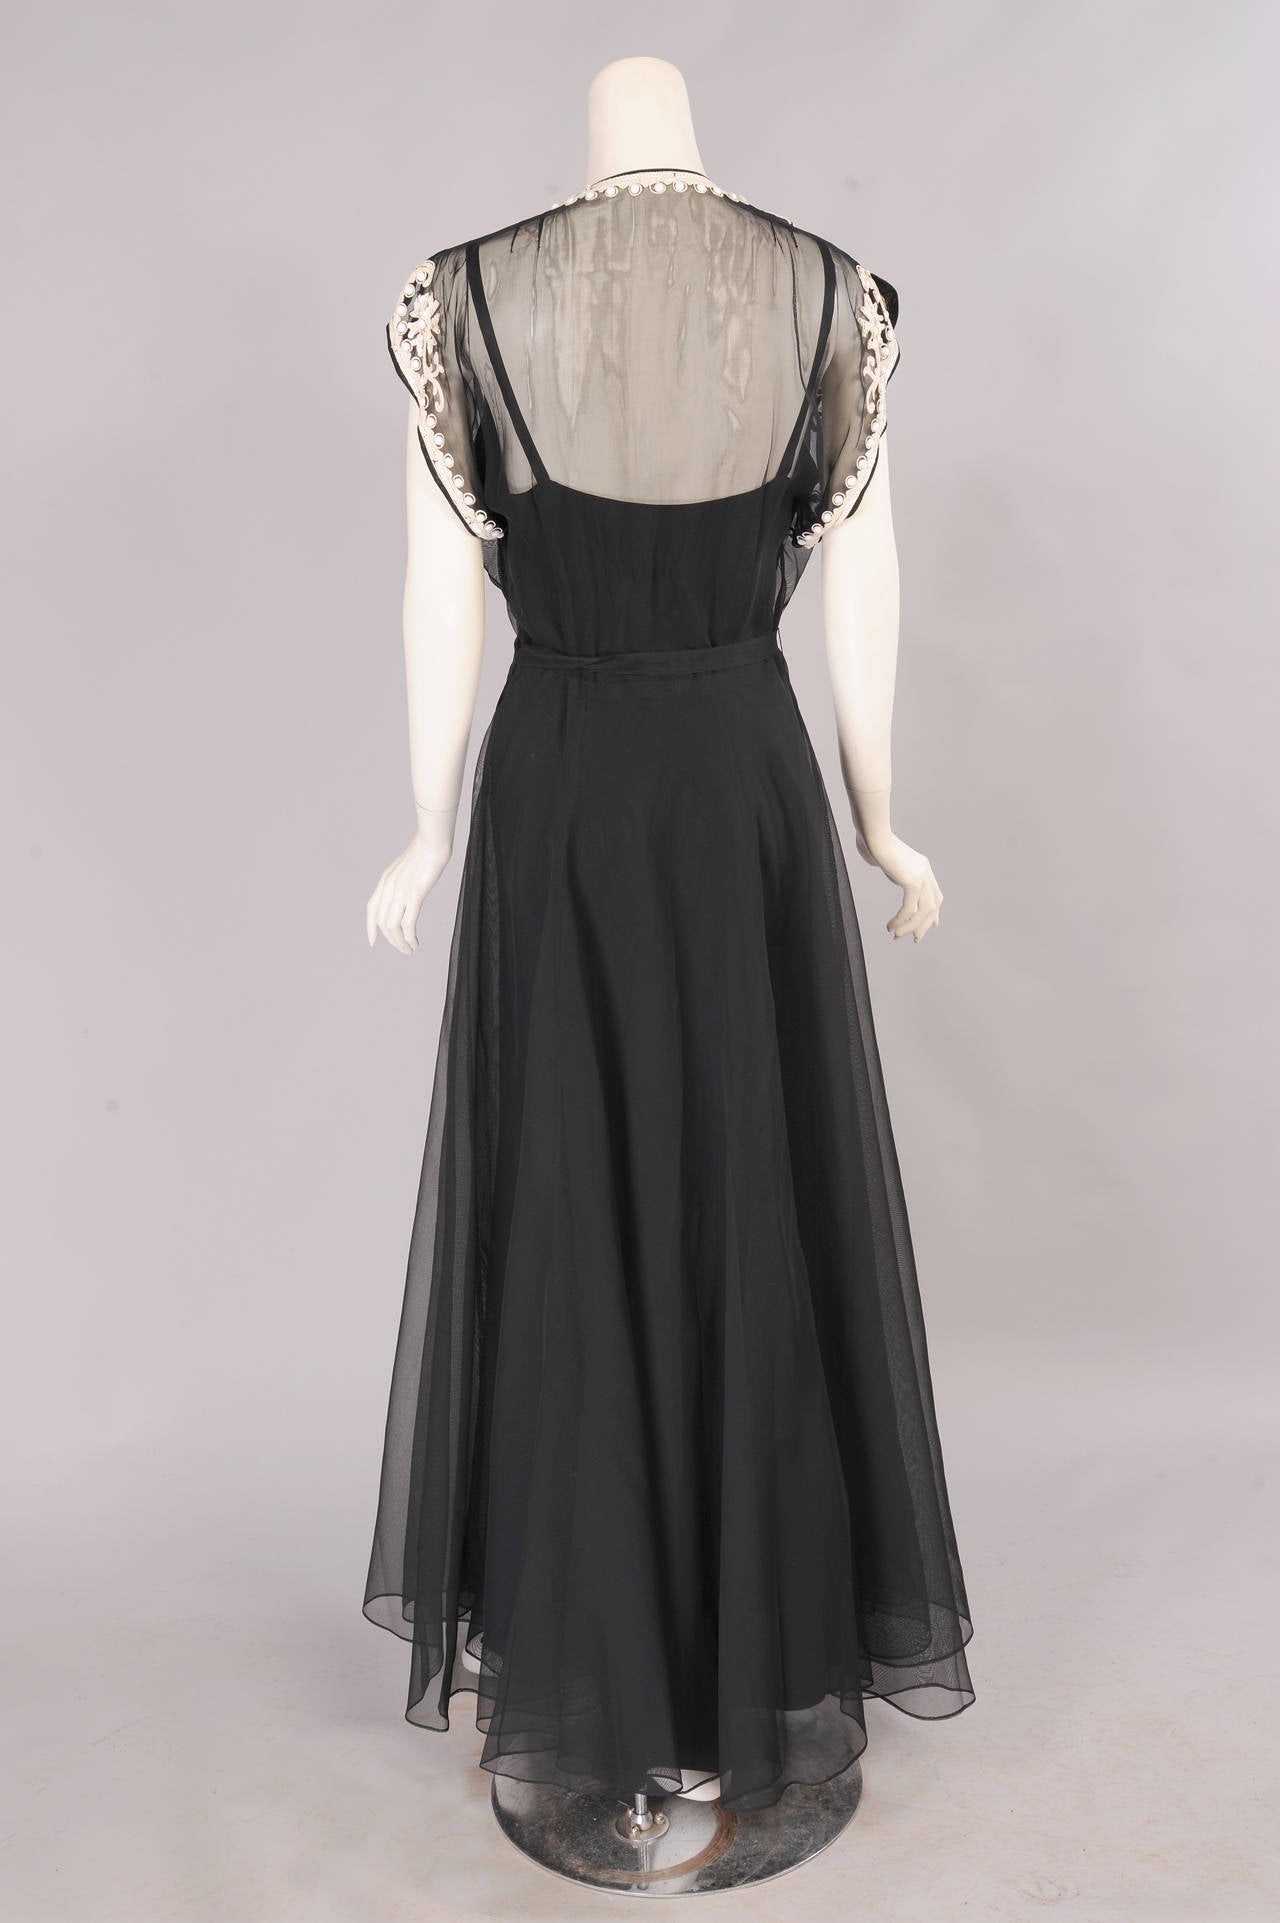 Women's 1940's Black Organza Gown with White Beadwork, Larger Size